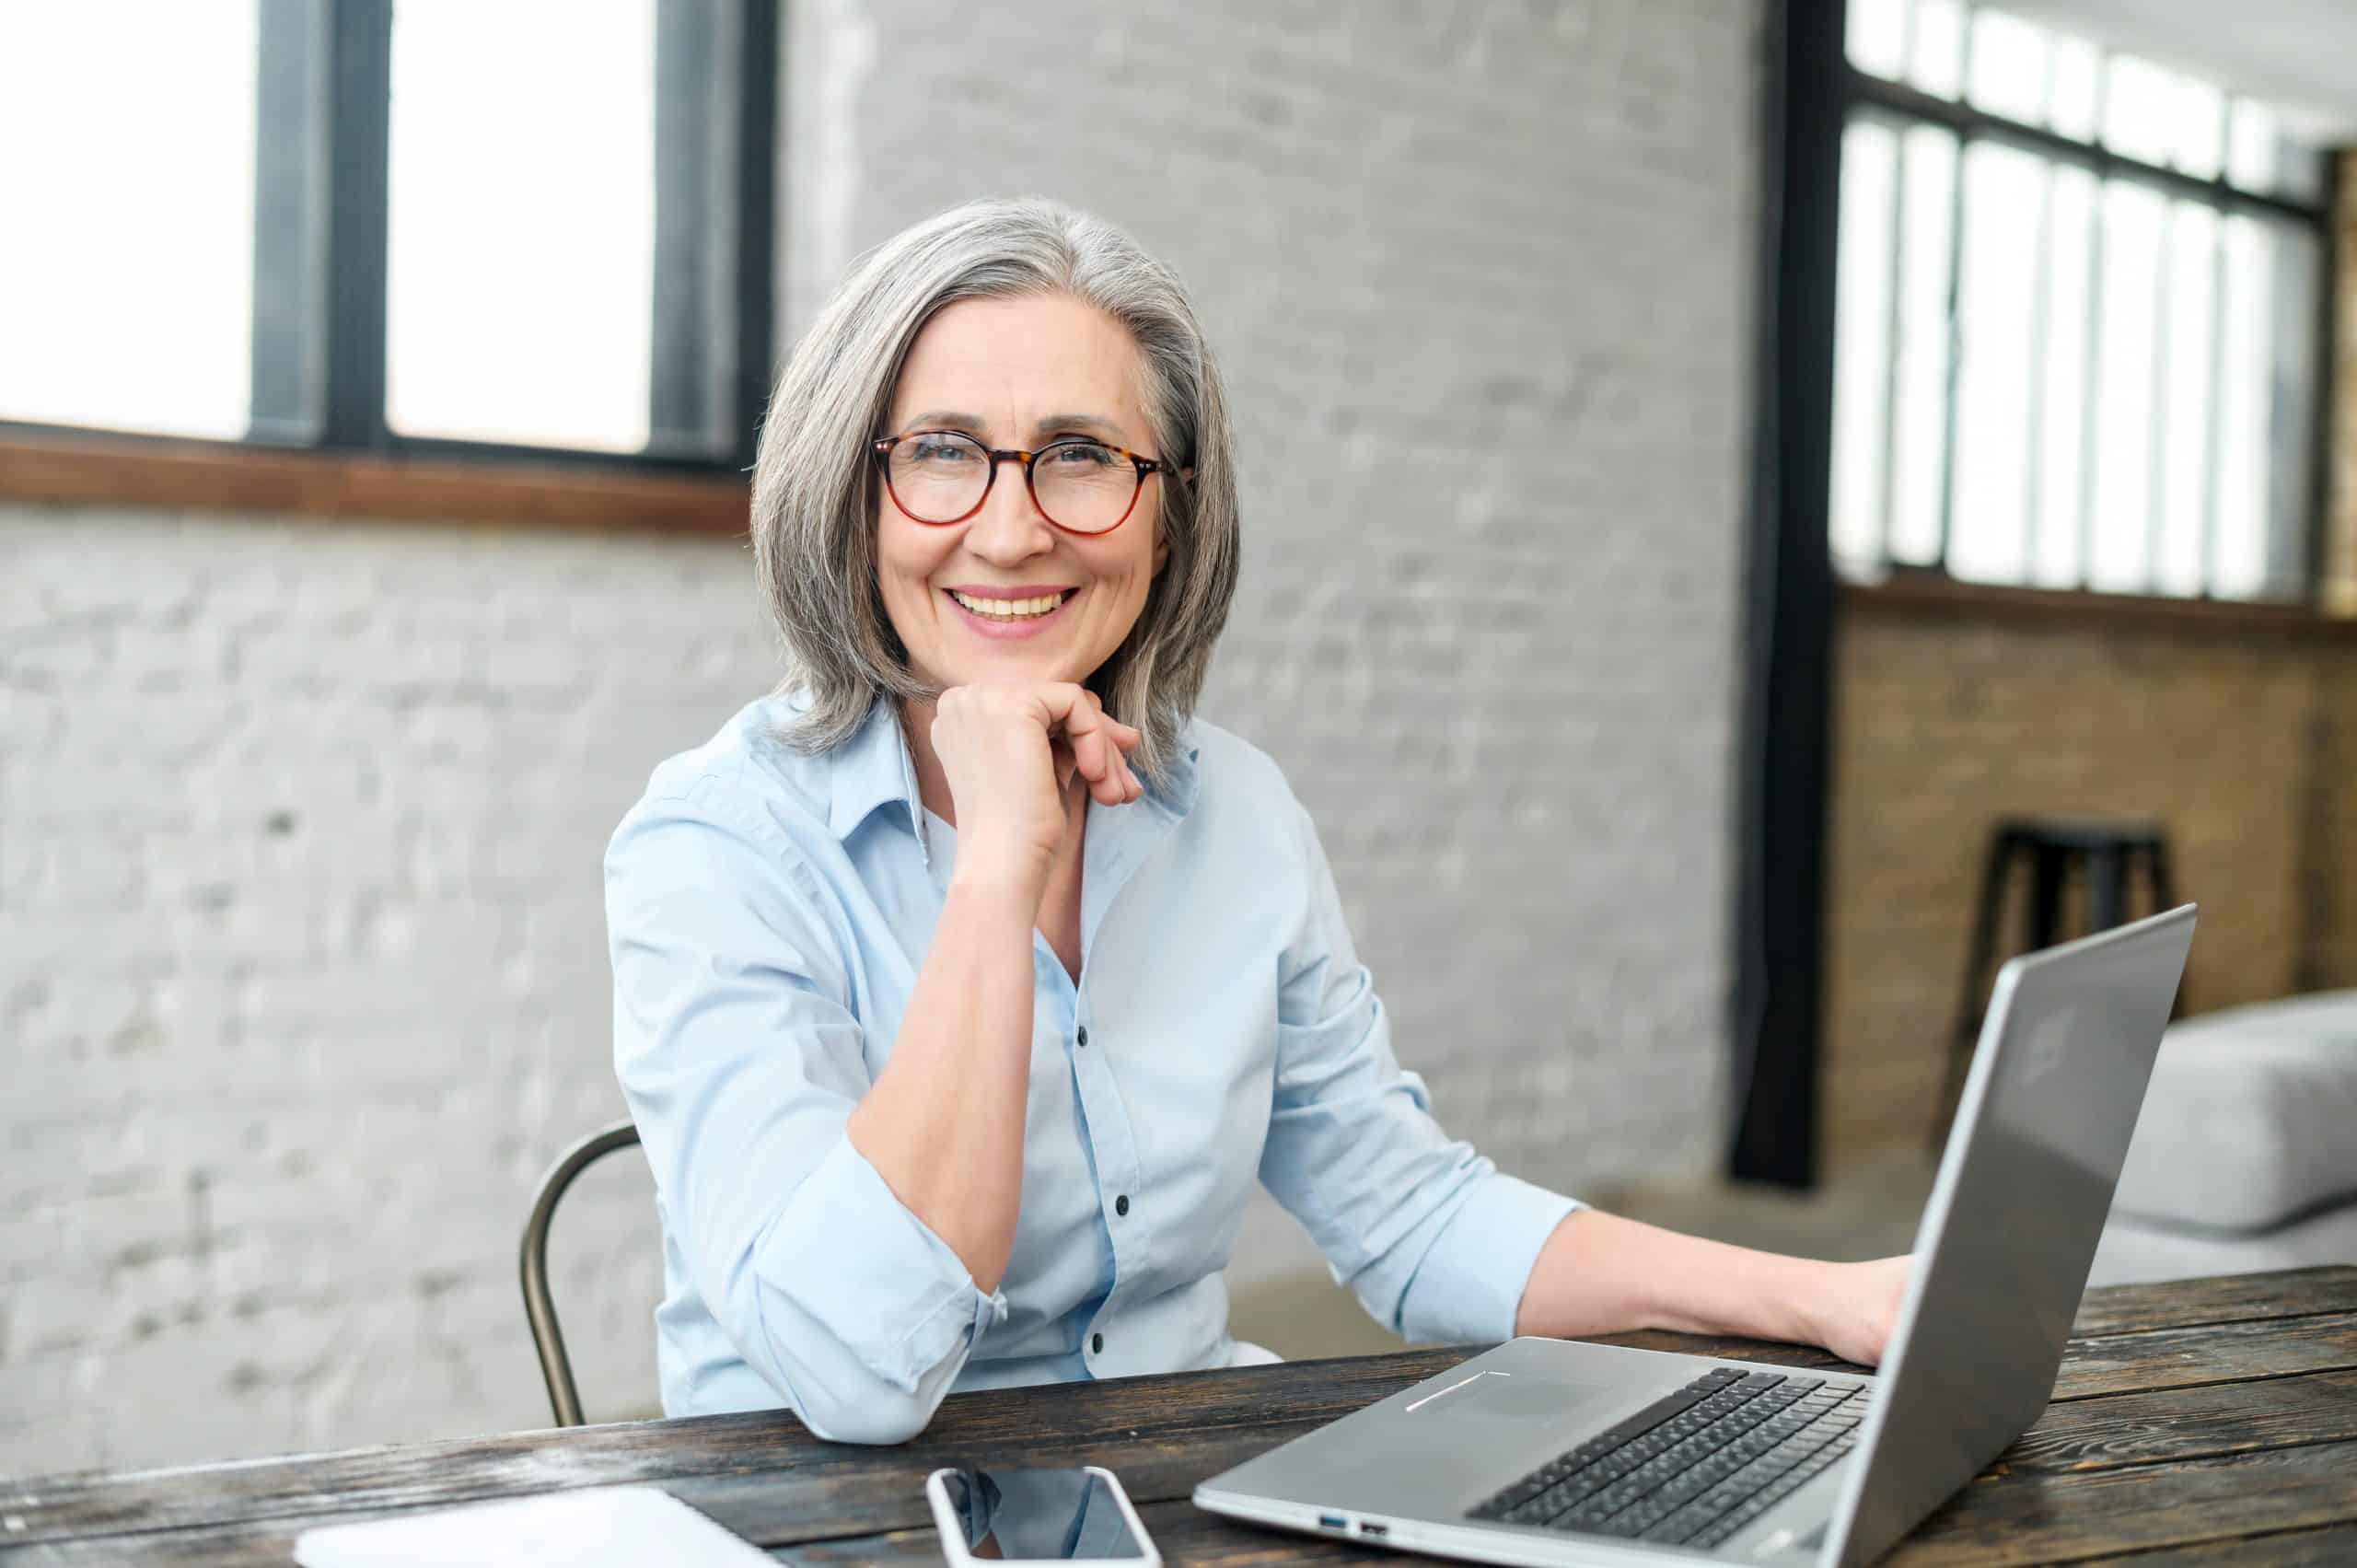 Woman with gray hair and glasses working on a laptop